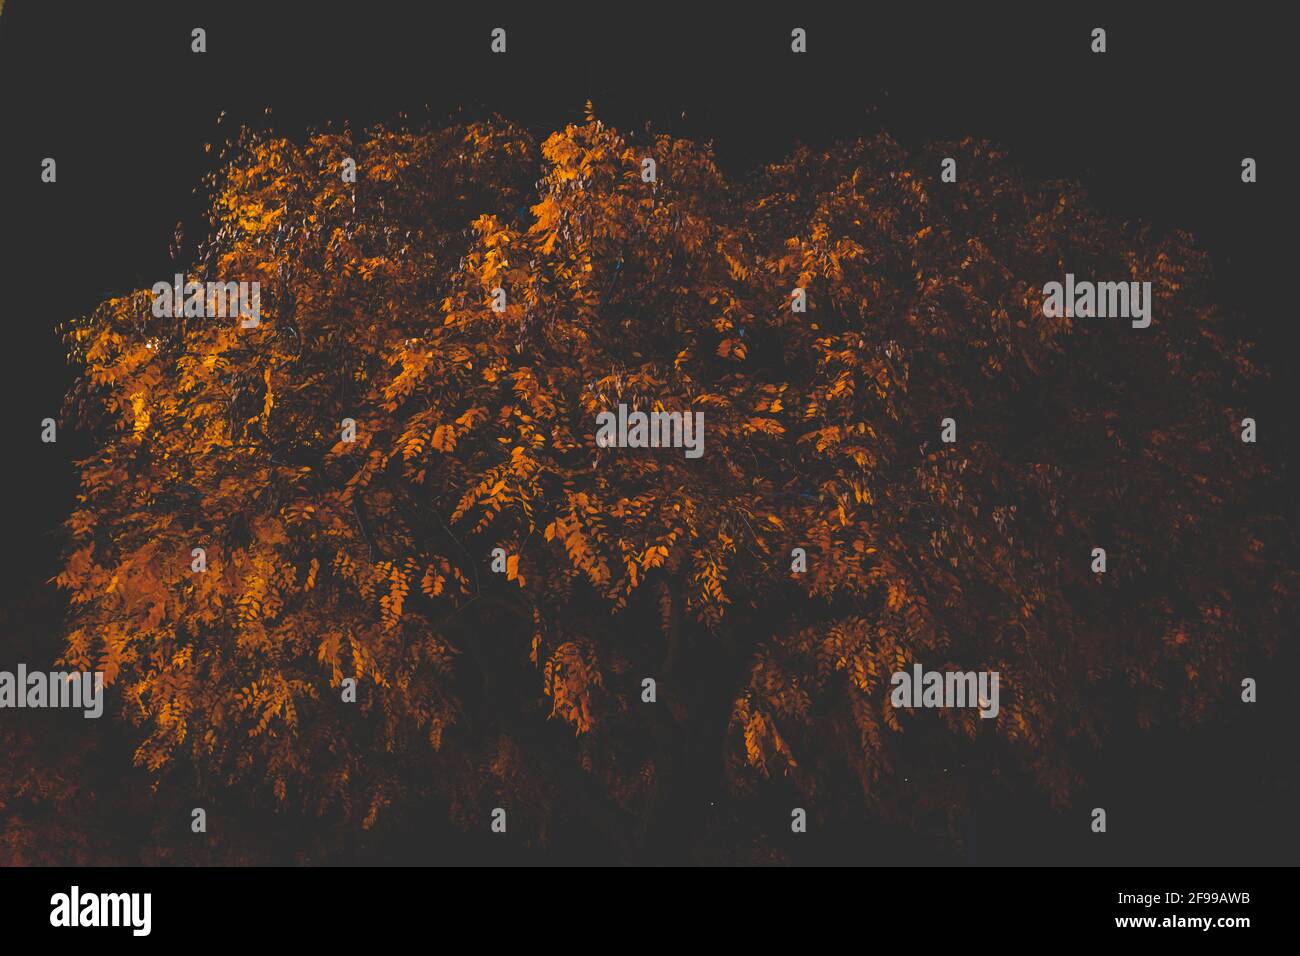 At night - light and dark - trees and leaves in autumn, illuminated Stock Photo